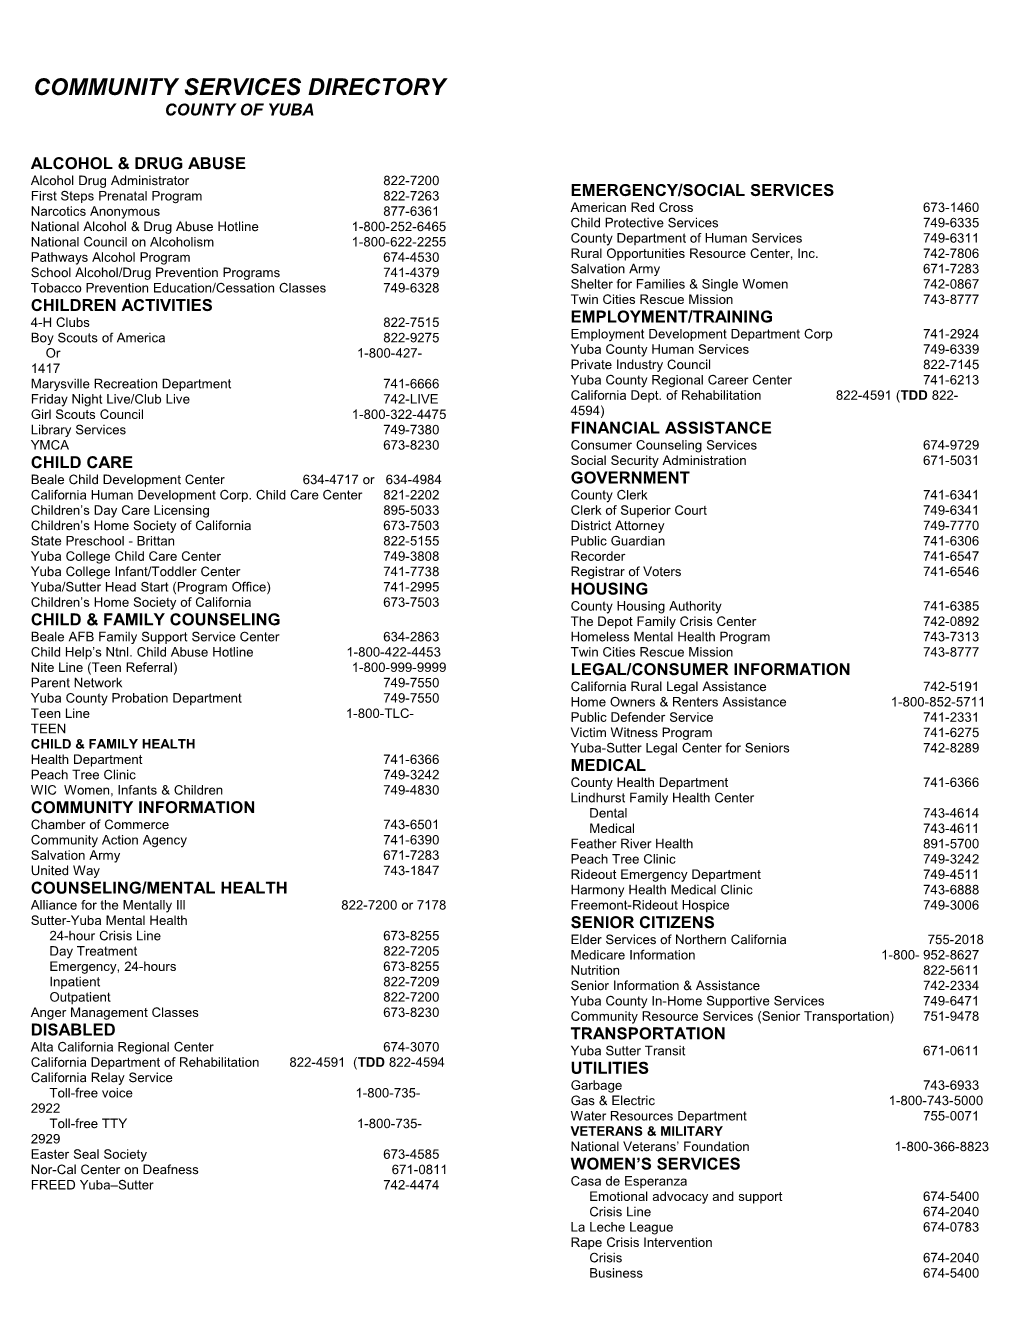 Community Services Directory